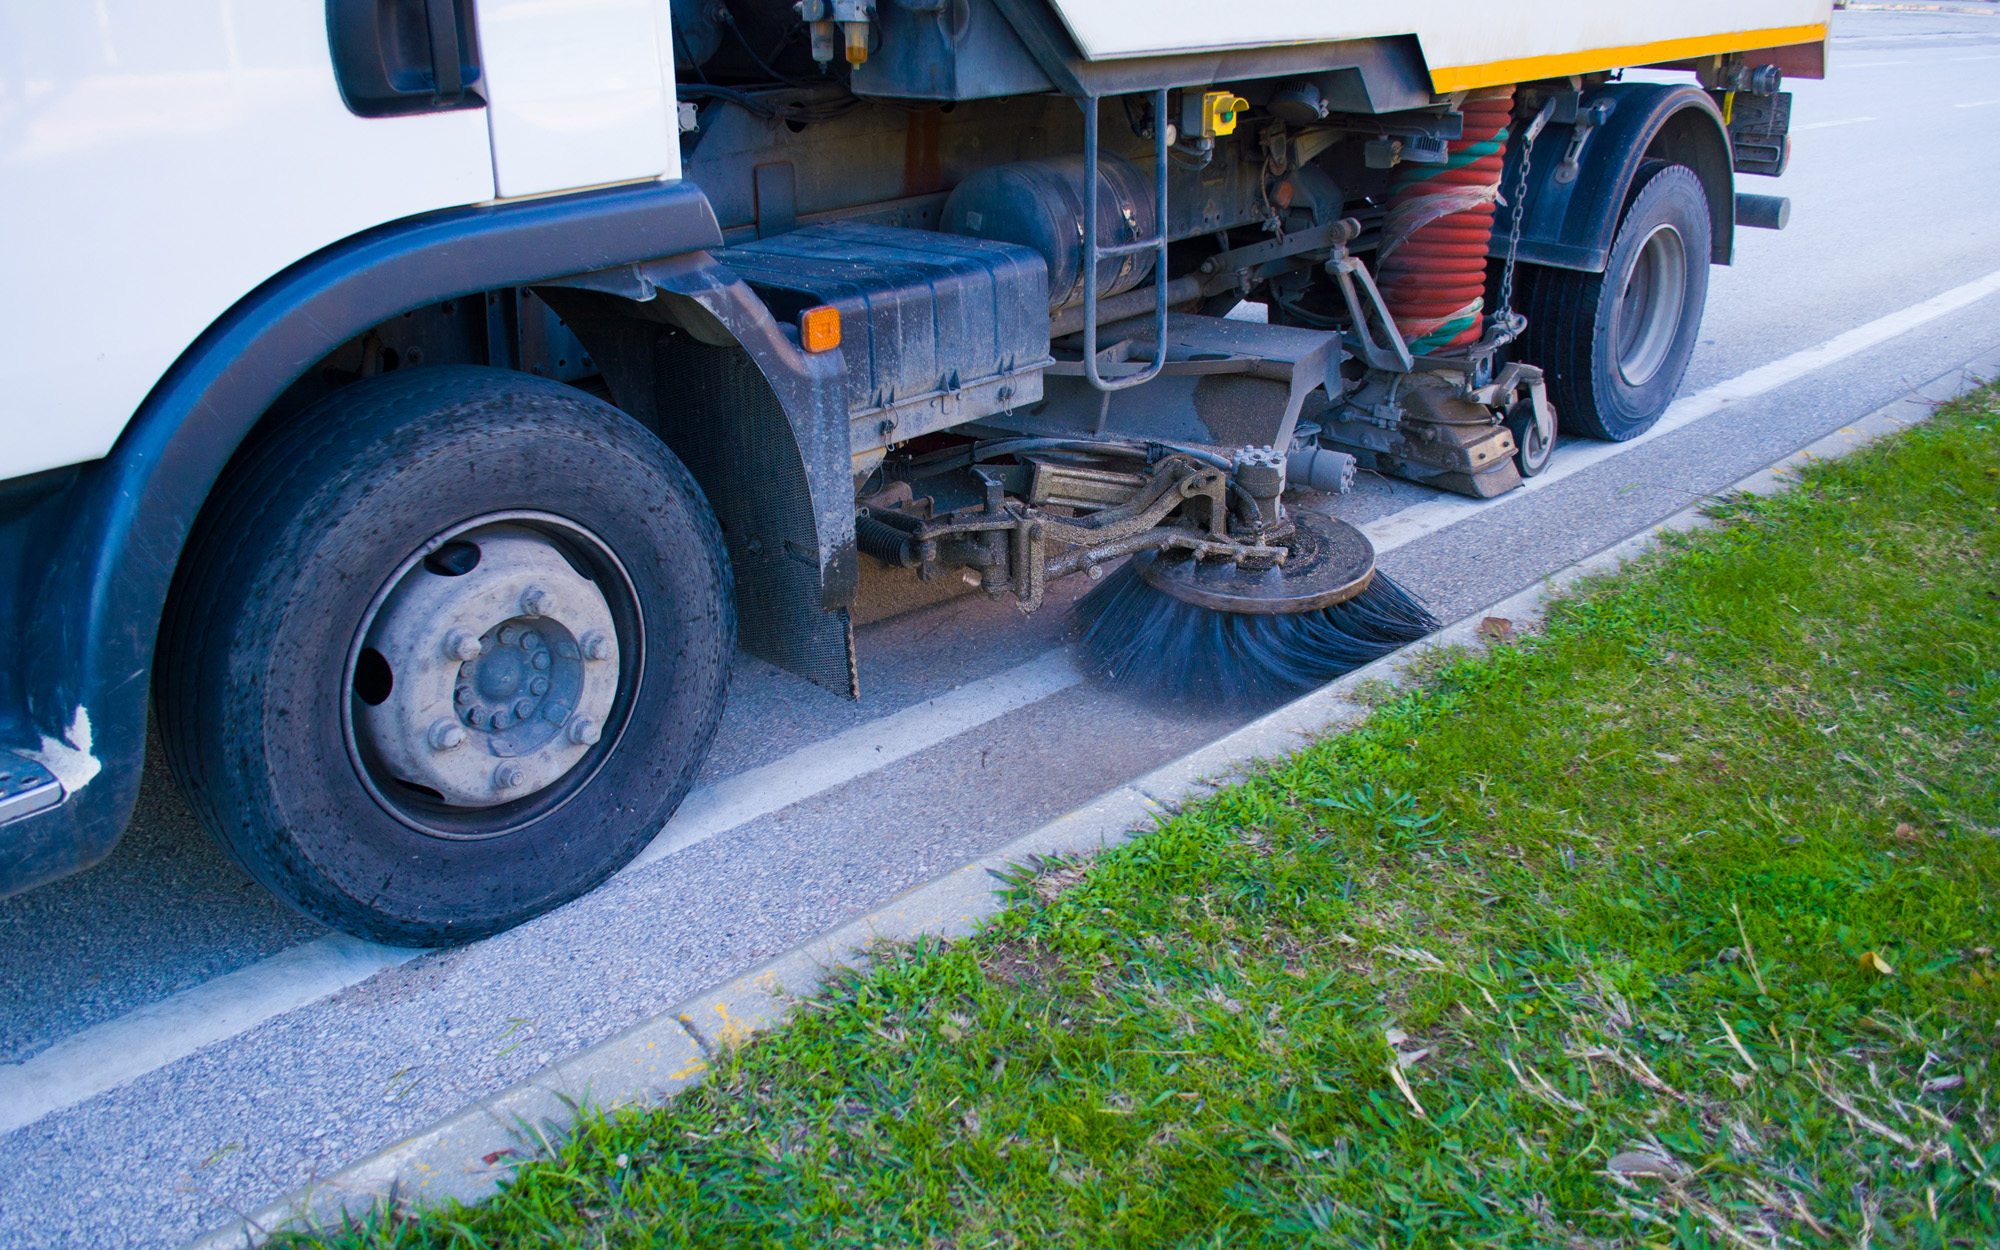 Keep Your Community Clean With The Street Cleaner